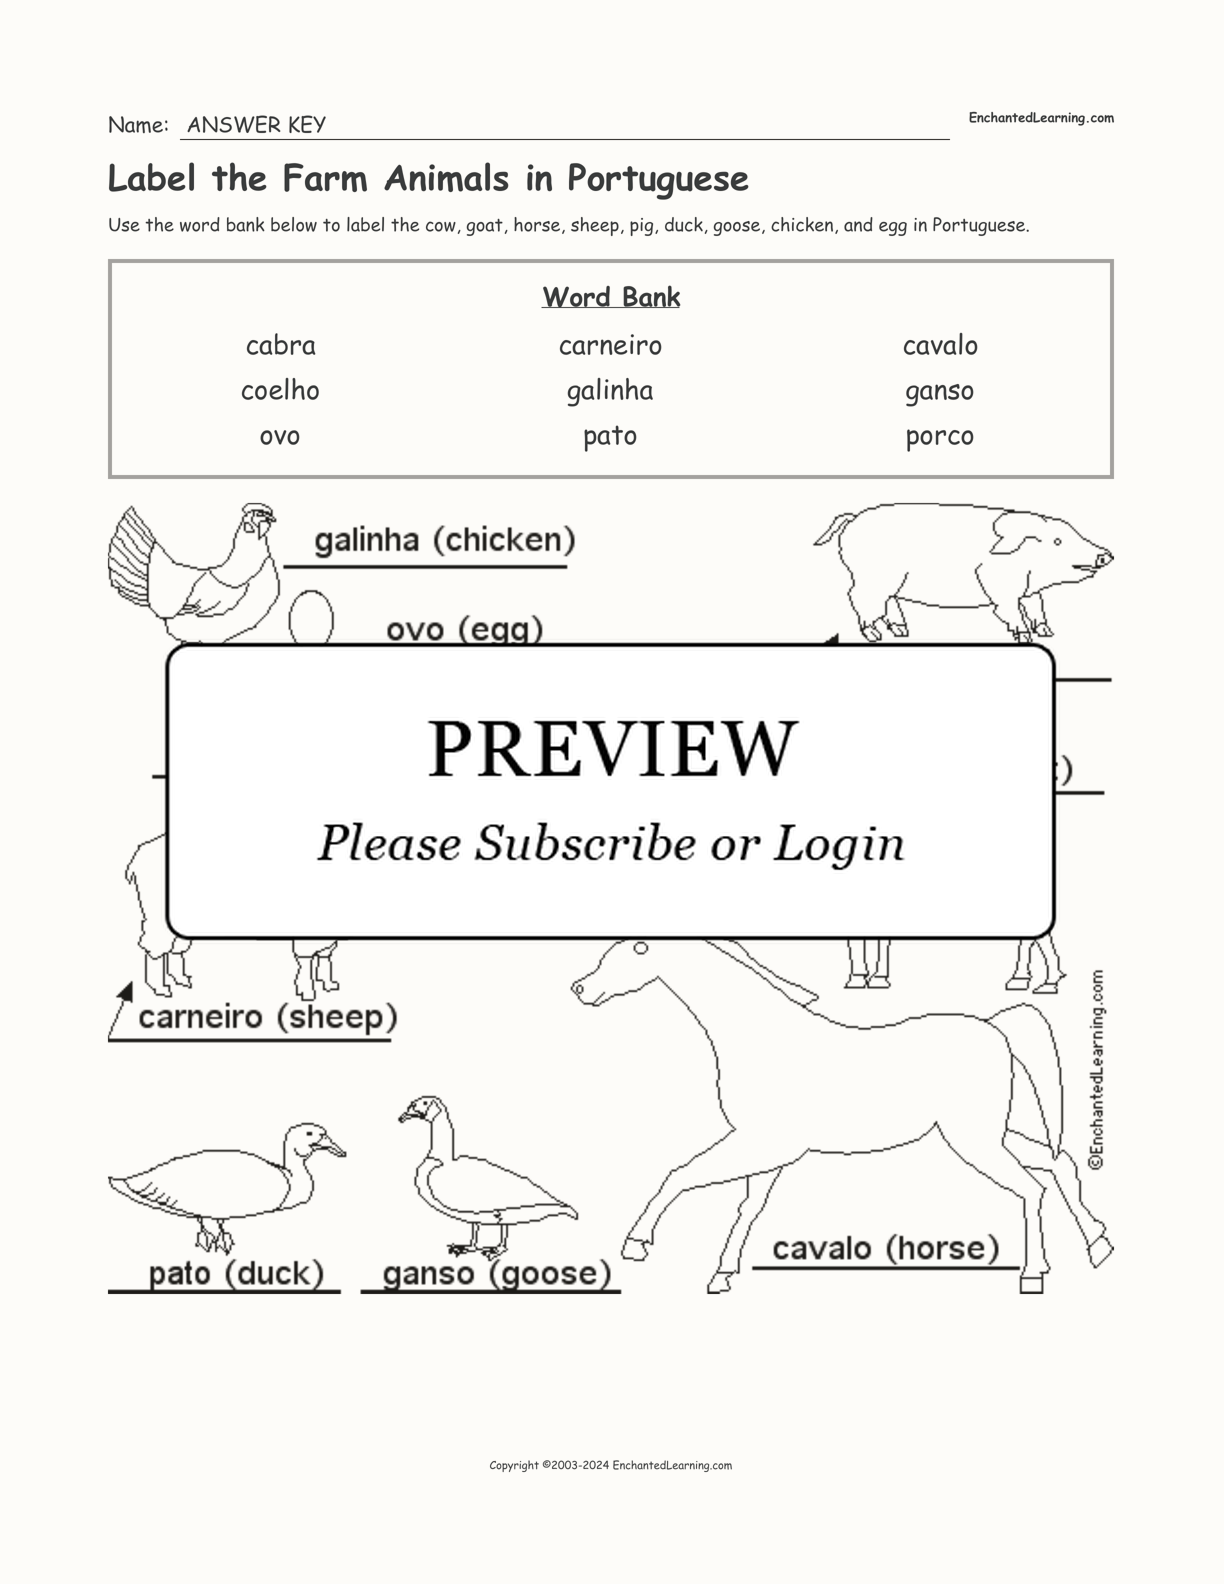 Label the Farm Animals in Portuguese interactive worksheet page 2